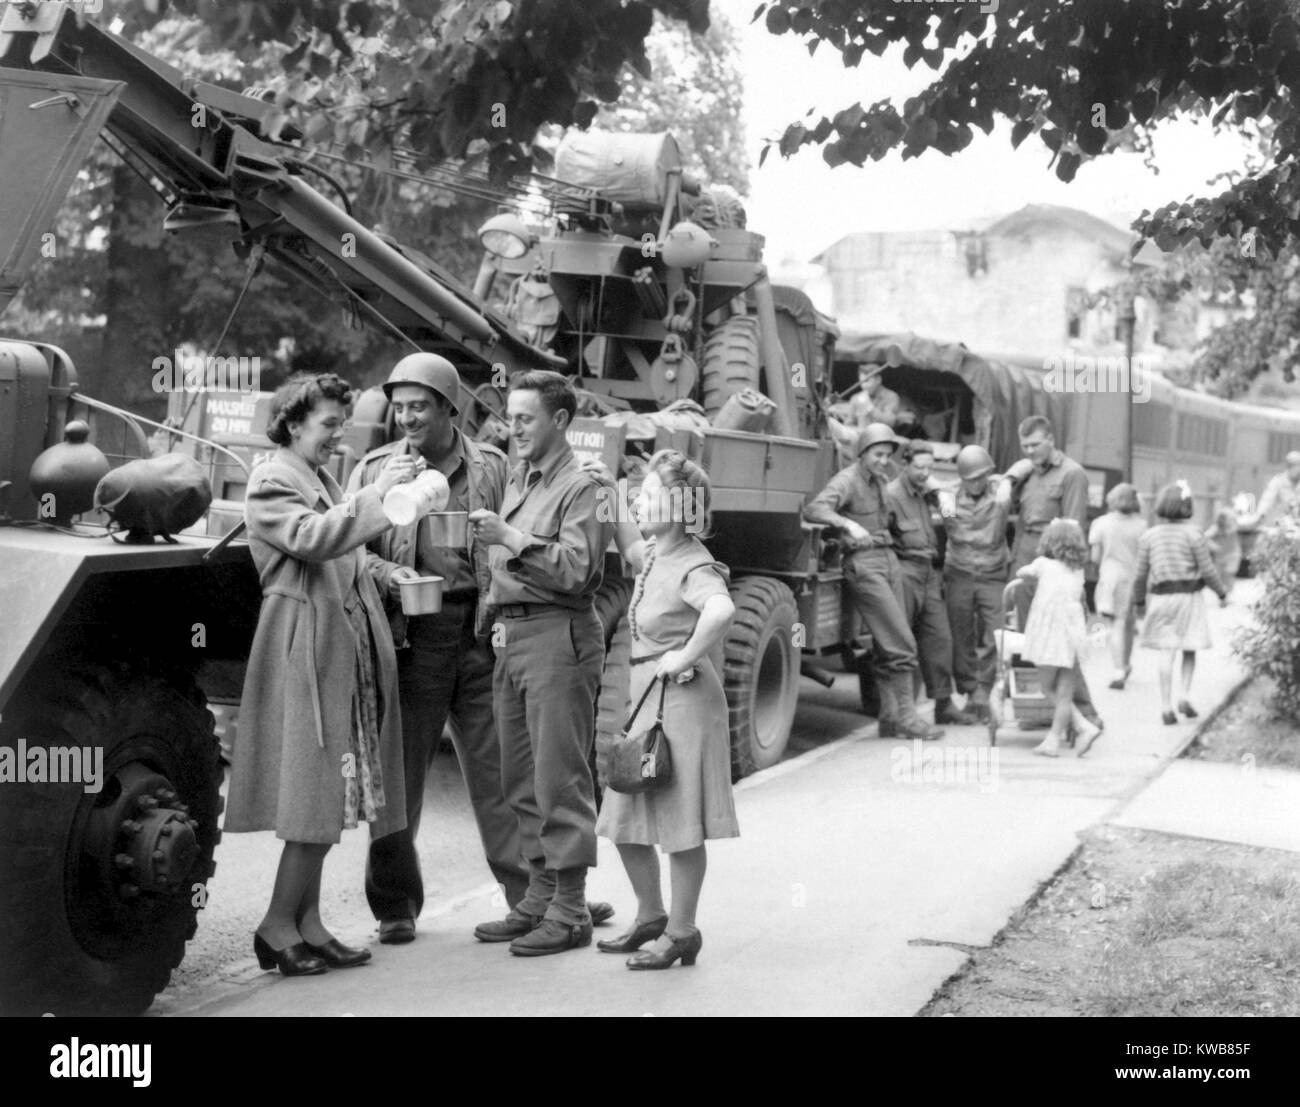 English townsfolk serve hot coffee to U.S. Army Ordnance men. They are awaiting their 'go' signal to join the ongoing invasion of France. July 24, 1944. World War 2. (BSLOC 2014 10 64) Stock Photo